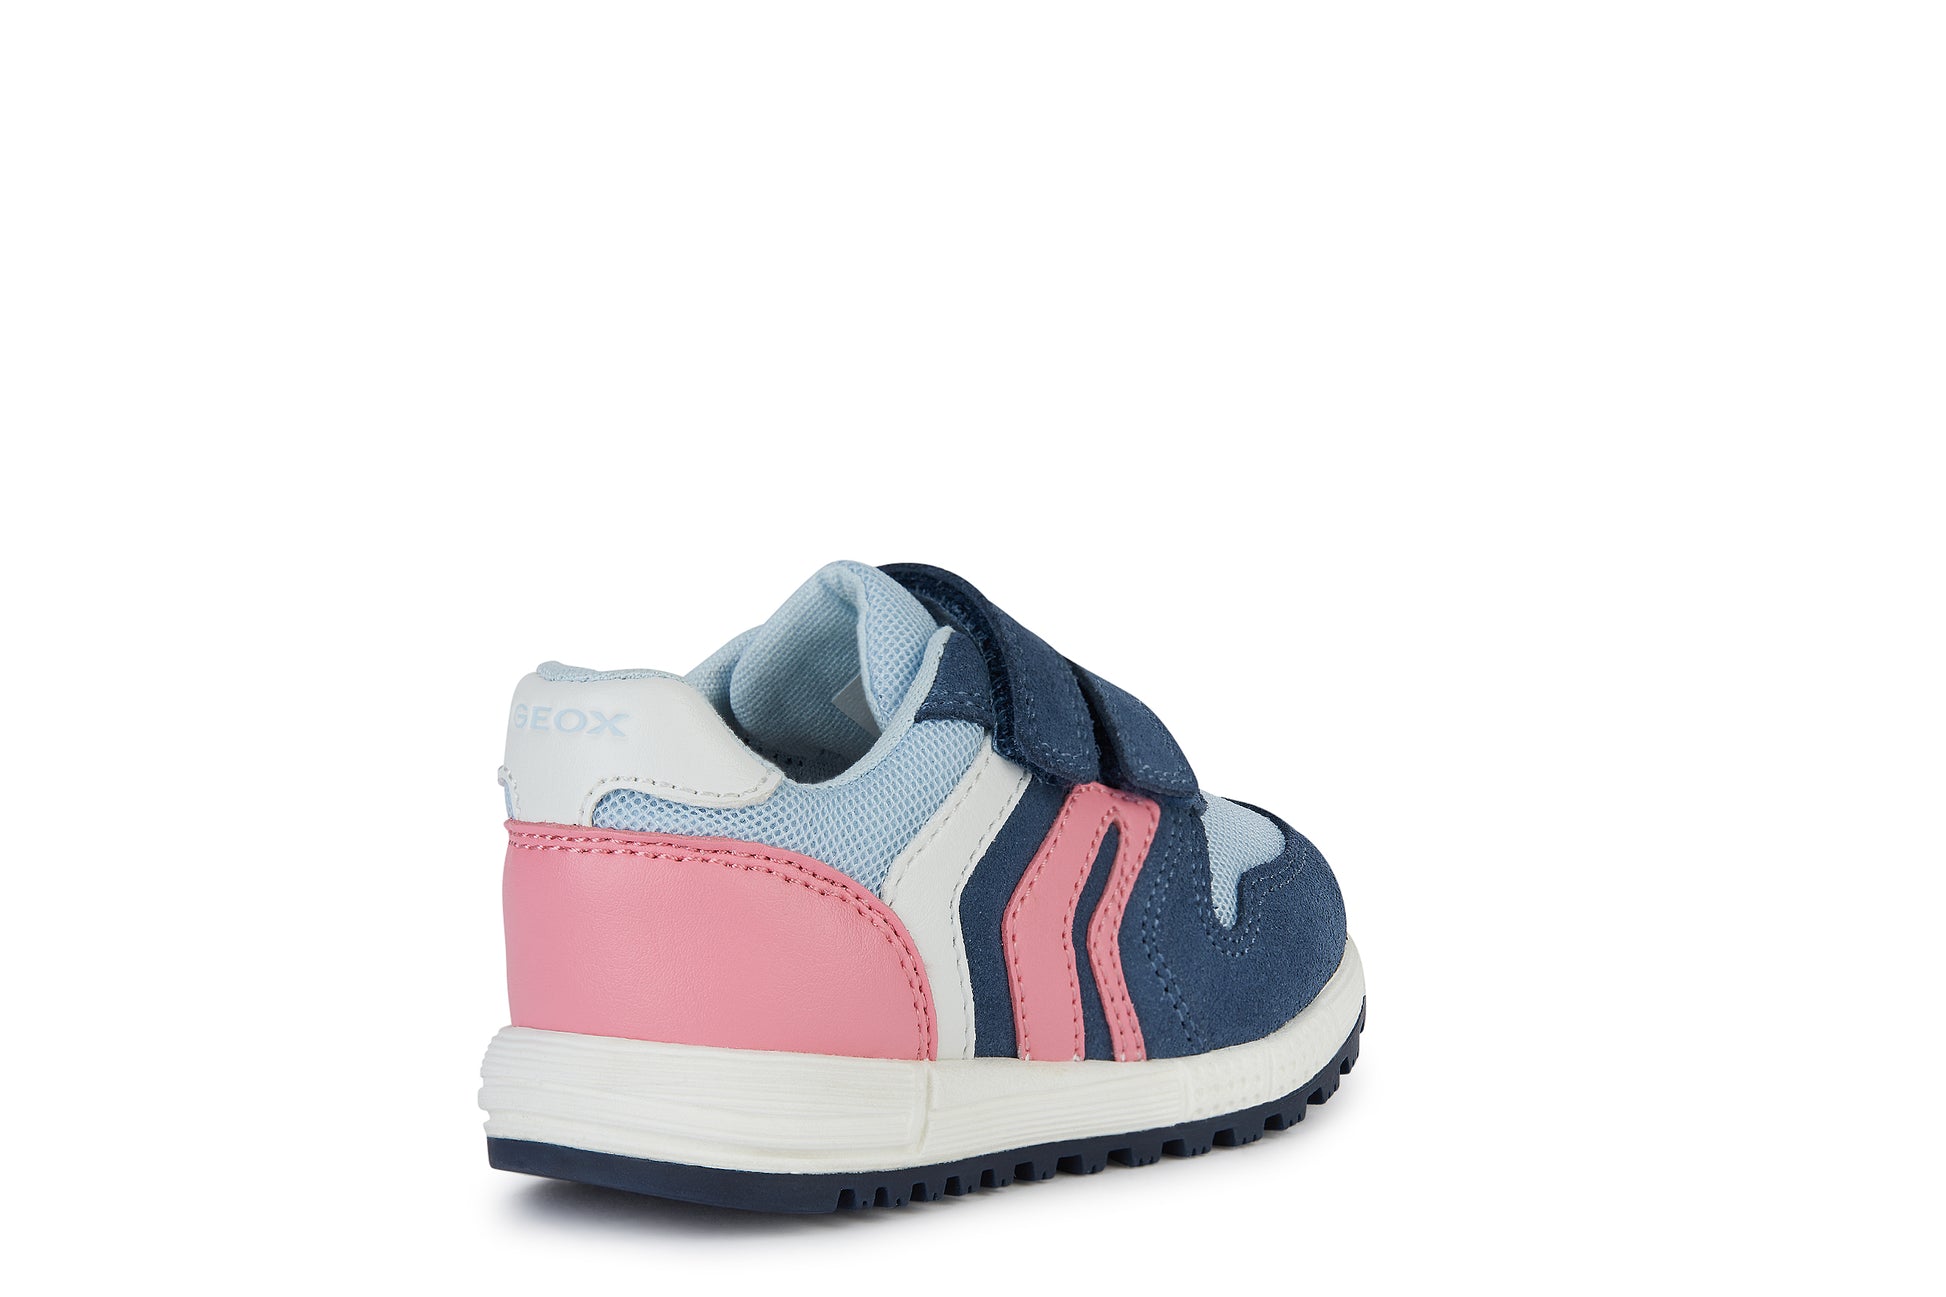 A girls trainer by Geox, style B Alben, in blue, pink and white with double velcro fastening. Angled right side view.